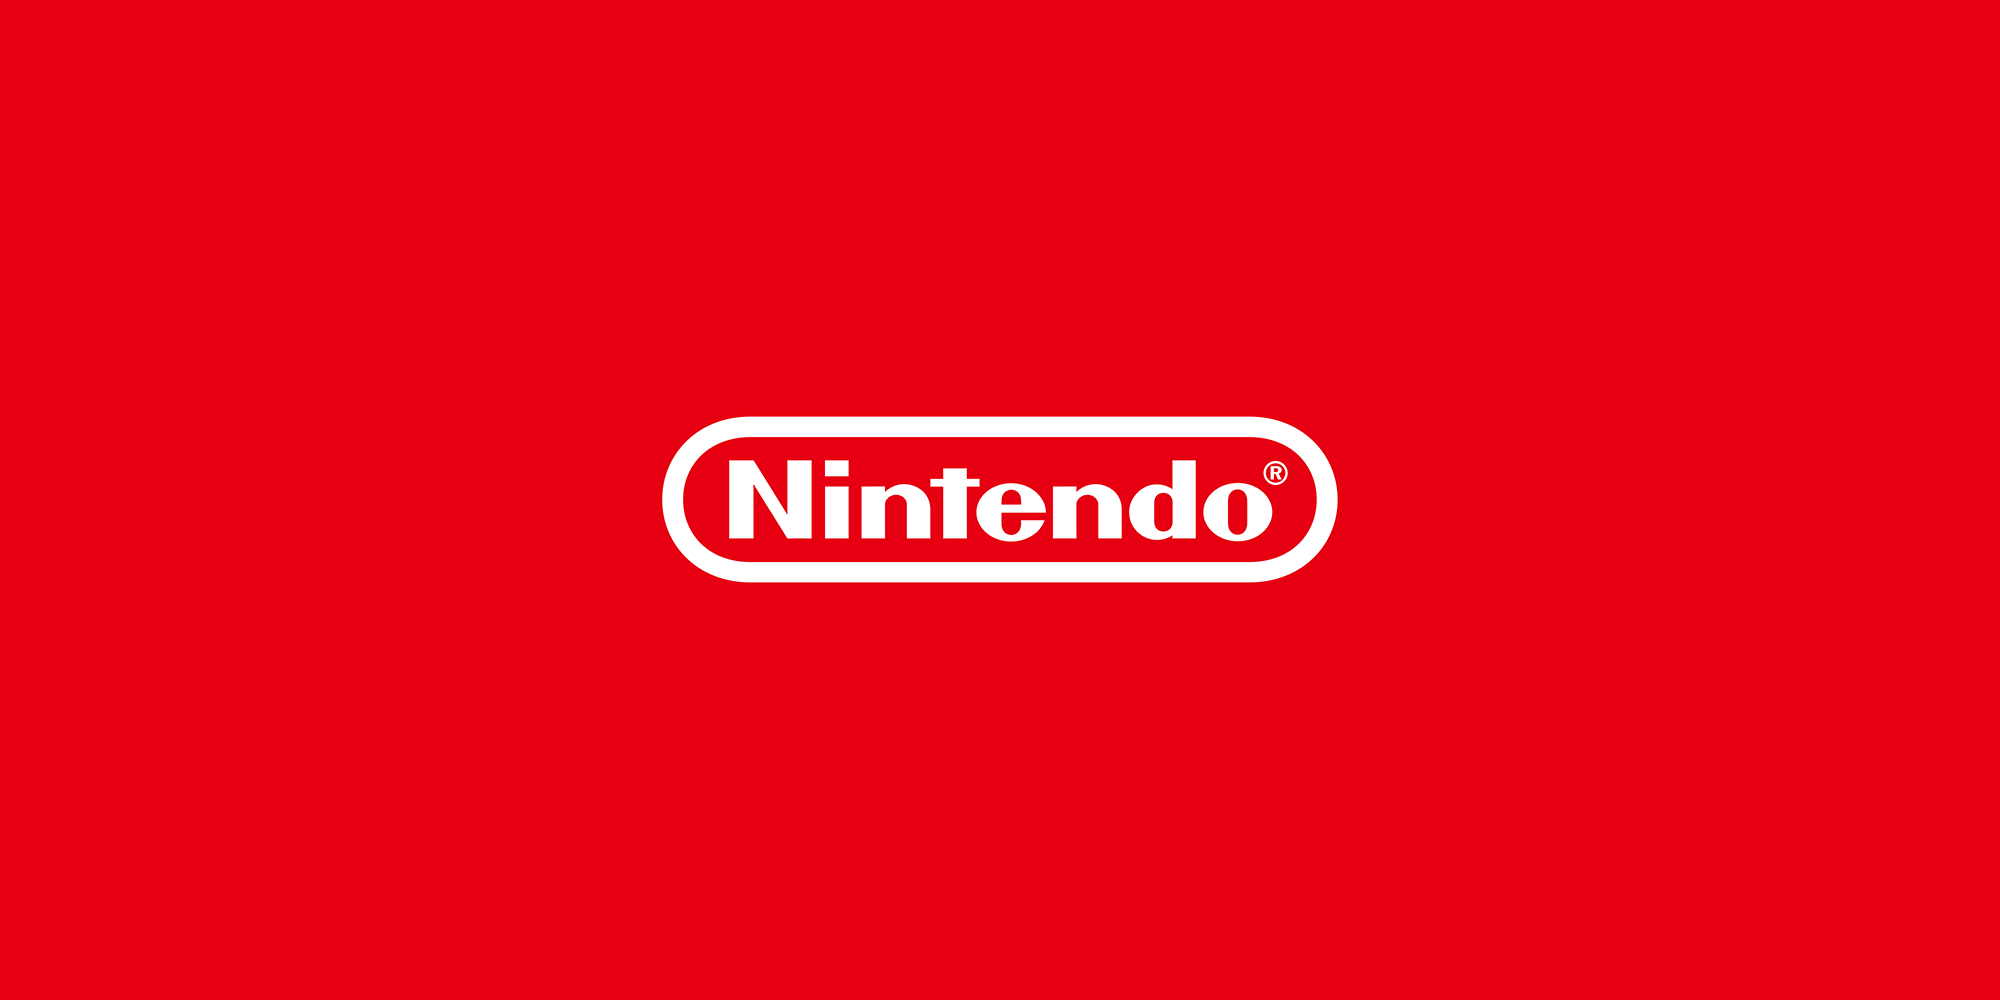 Nintendo Says Fans Are Hard to Please